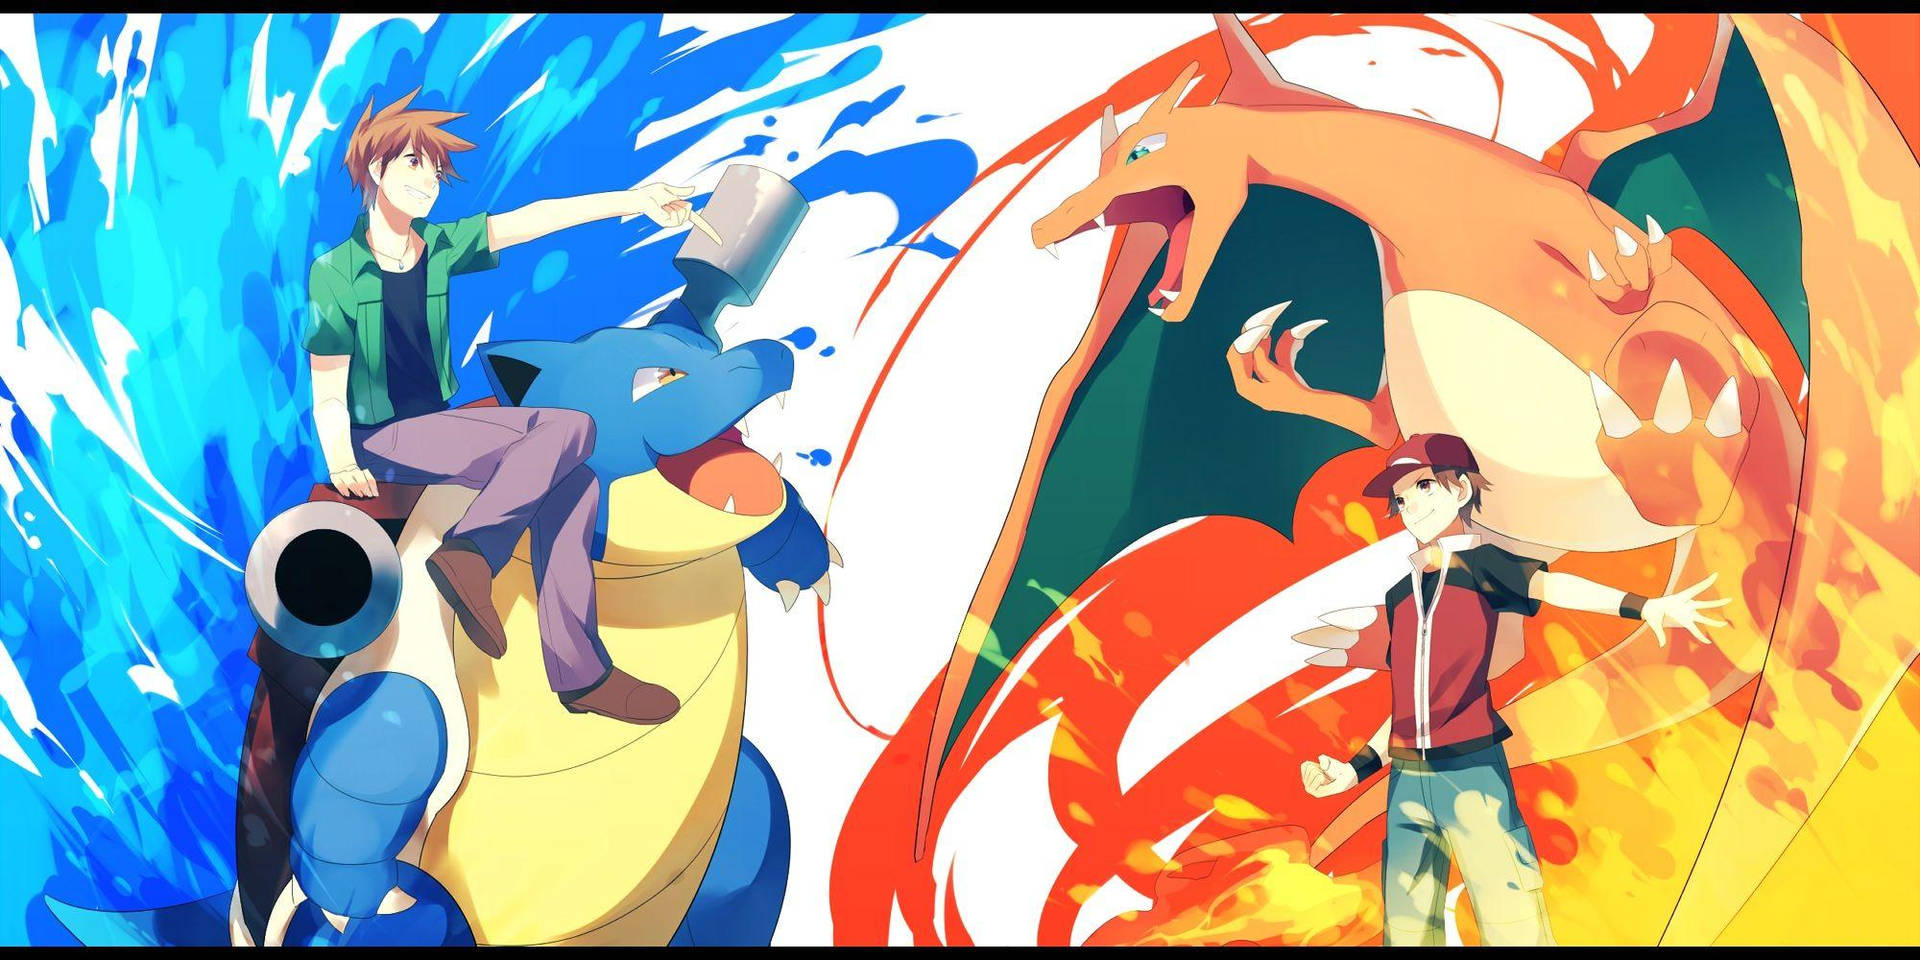 The Ultimate Duel - Blastoise And Charizard's Epic Match!